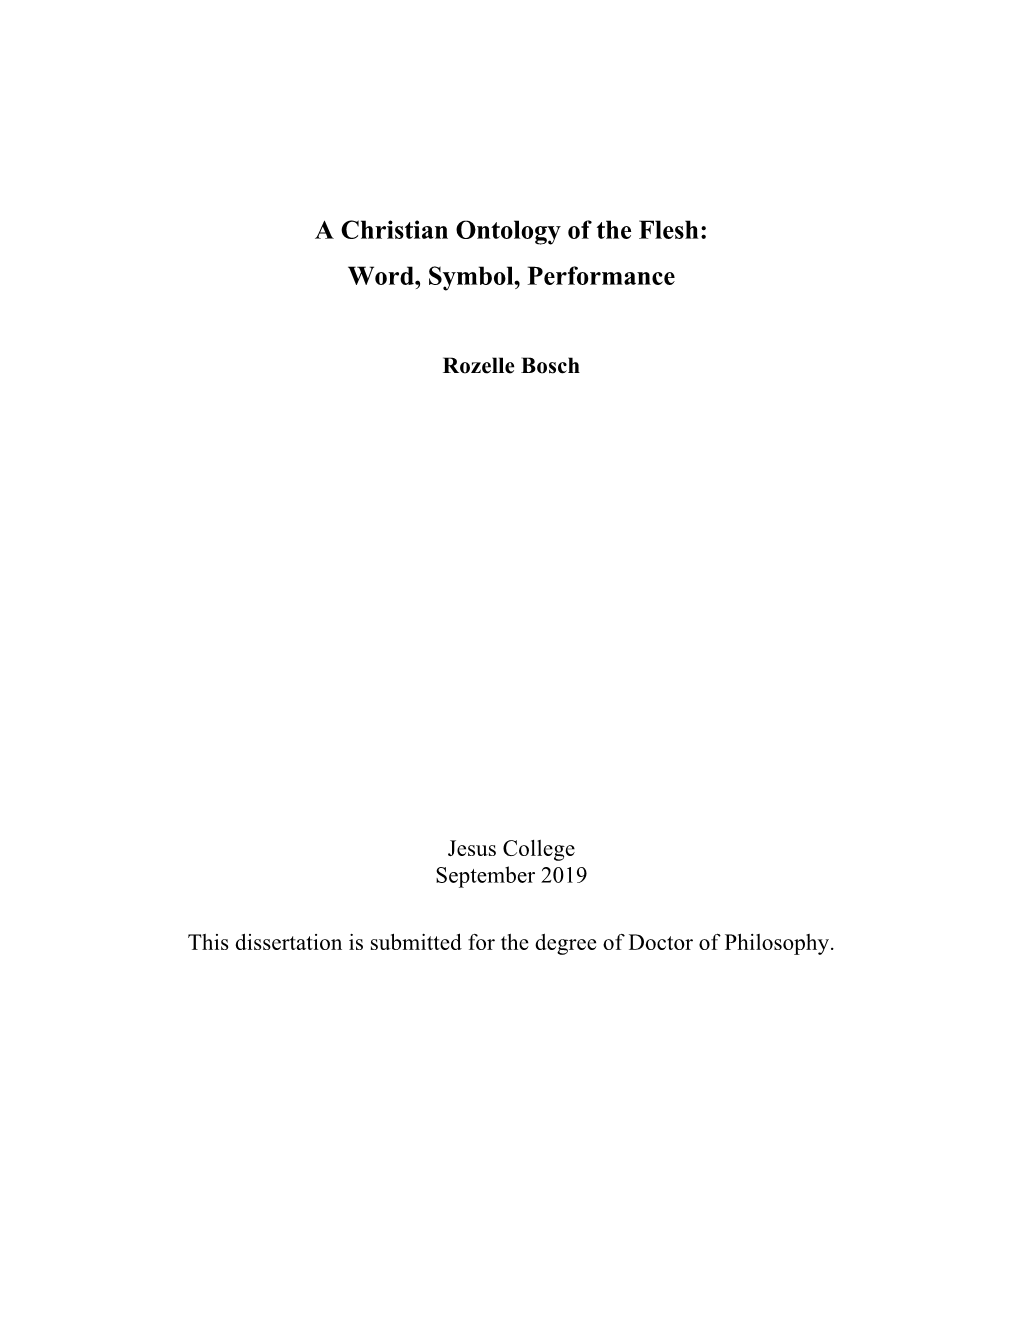 A Christian Ontology of the Flesh: Word, Symbol, Performance